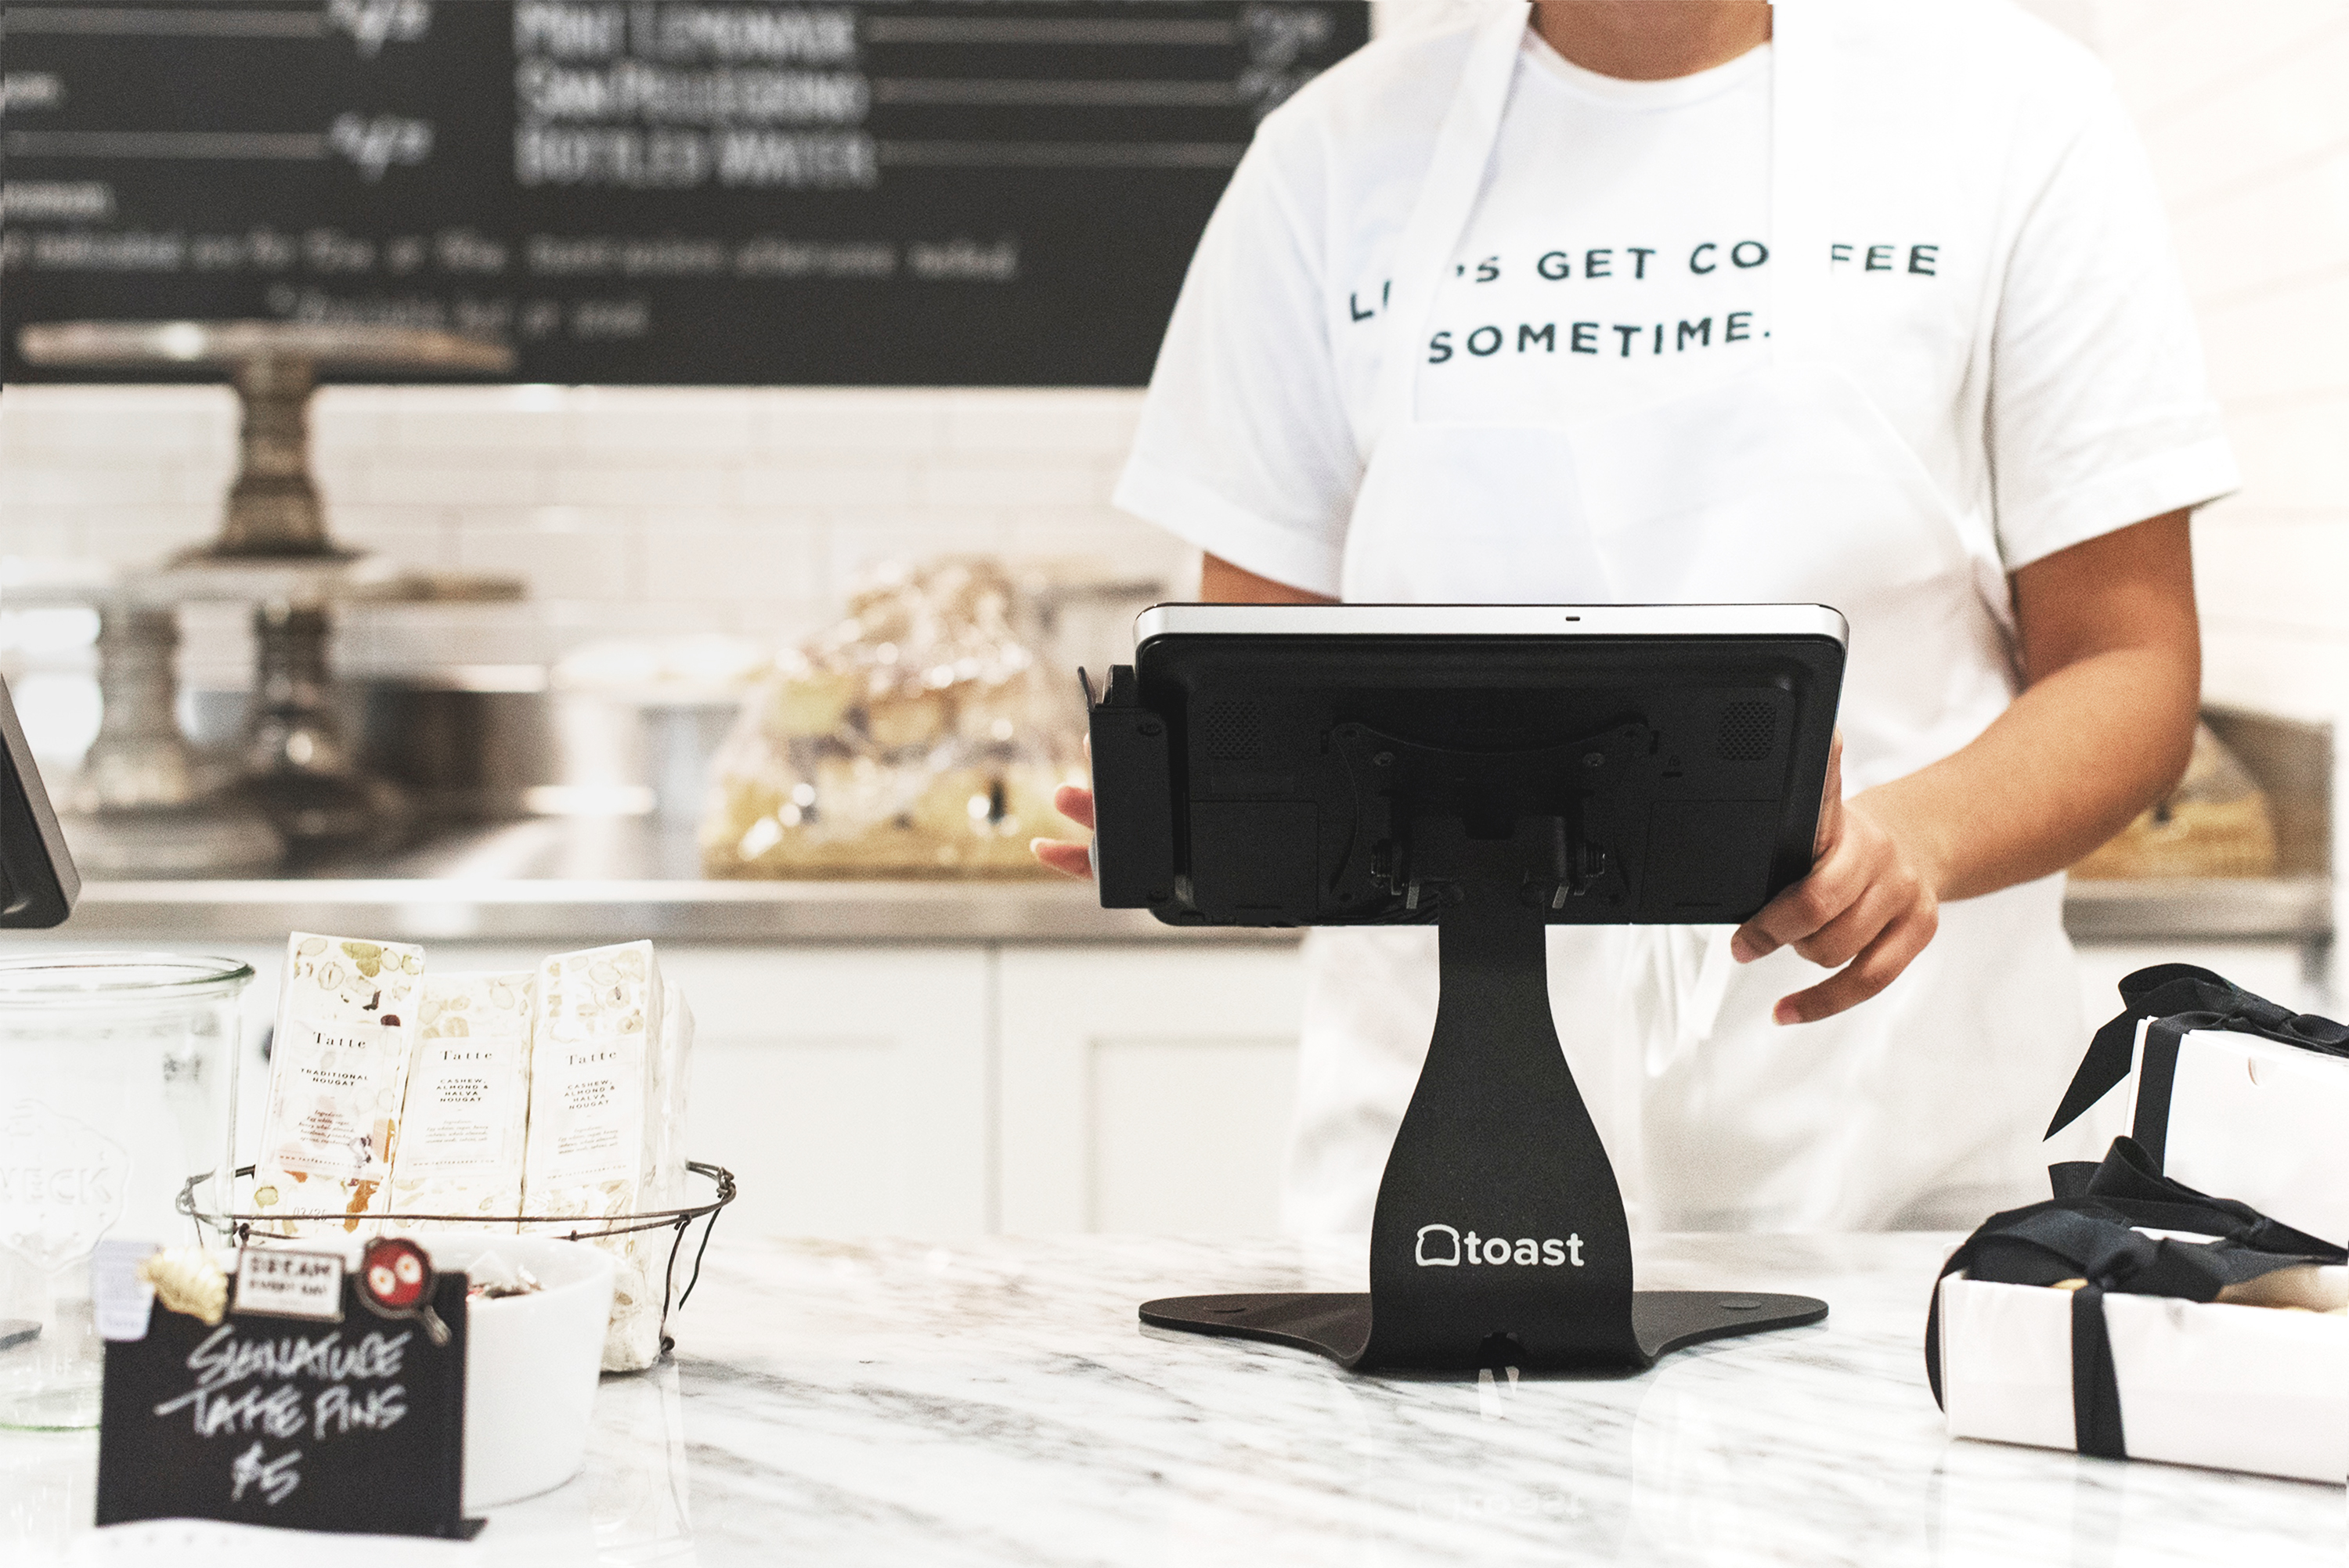 A white marble restaurant counter with a tablet mounted on a stand and a person operating said tablet.